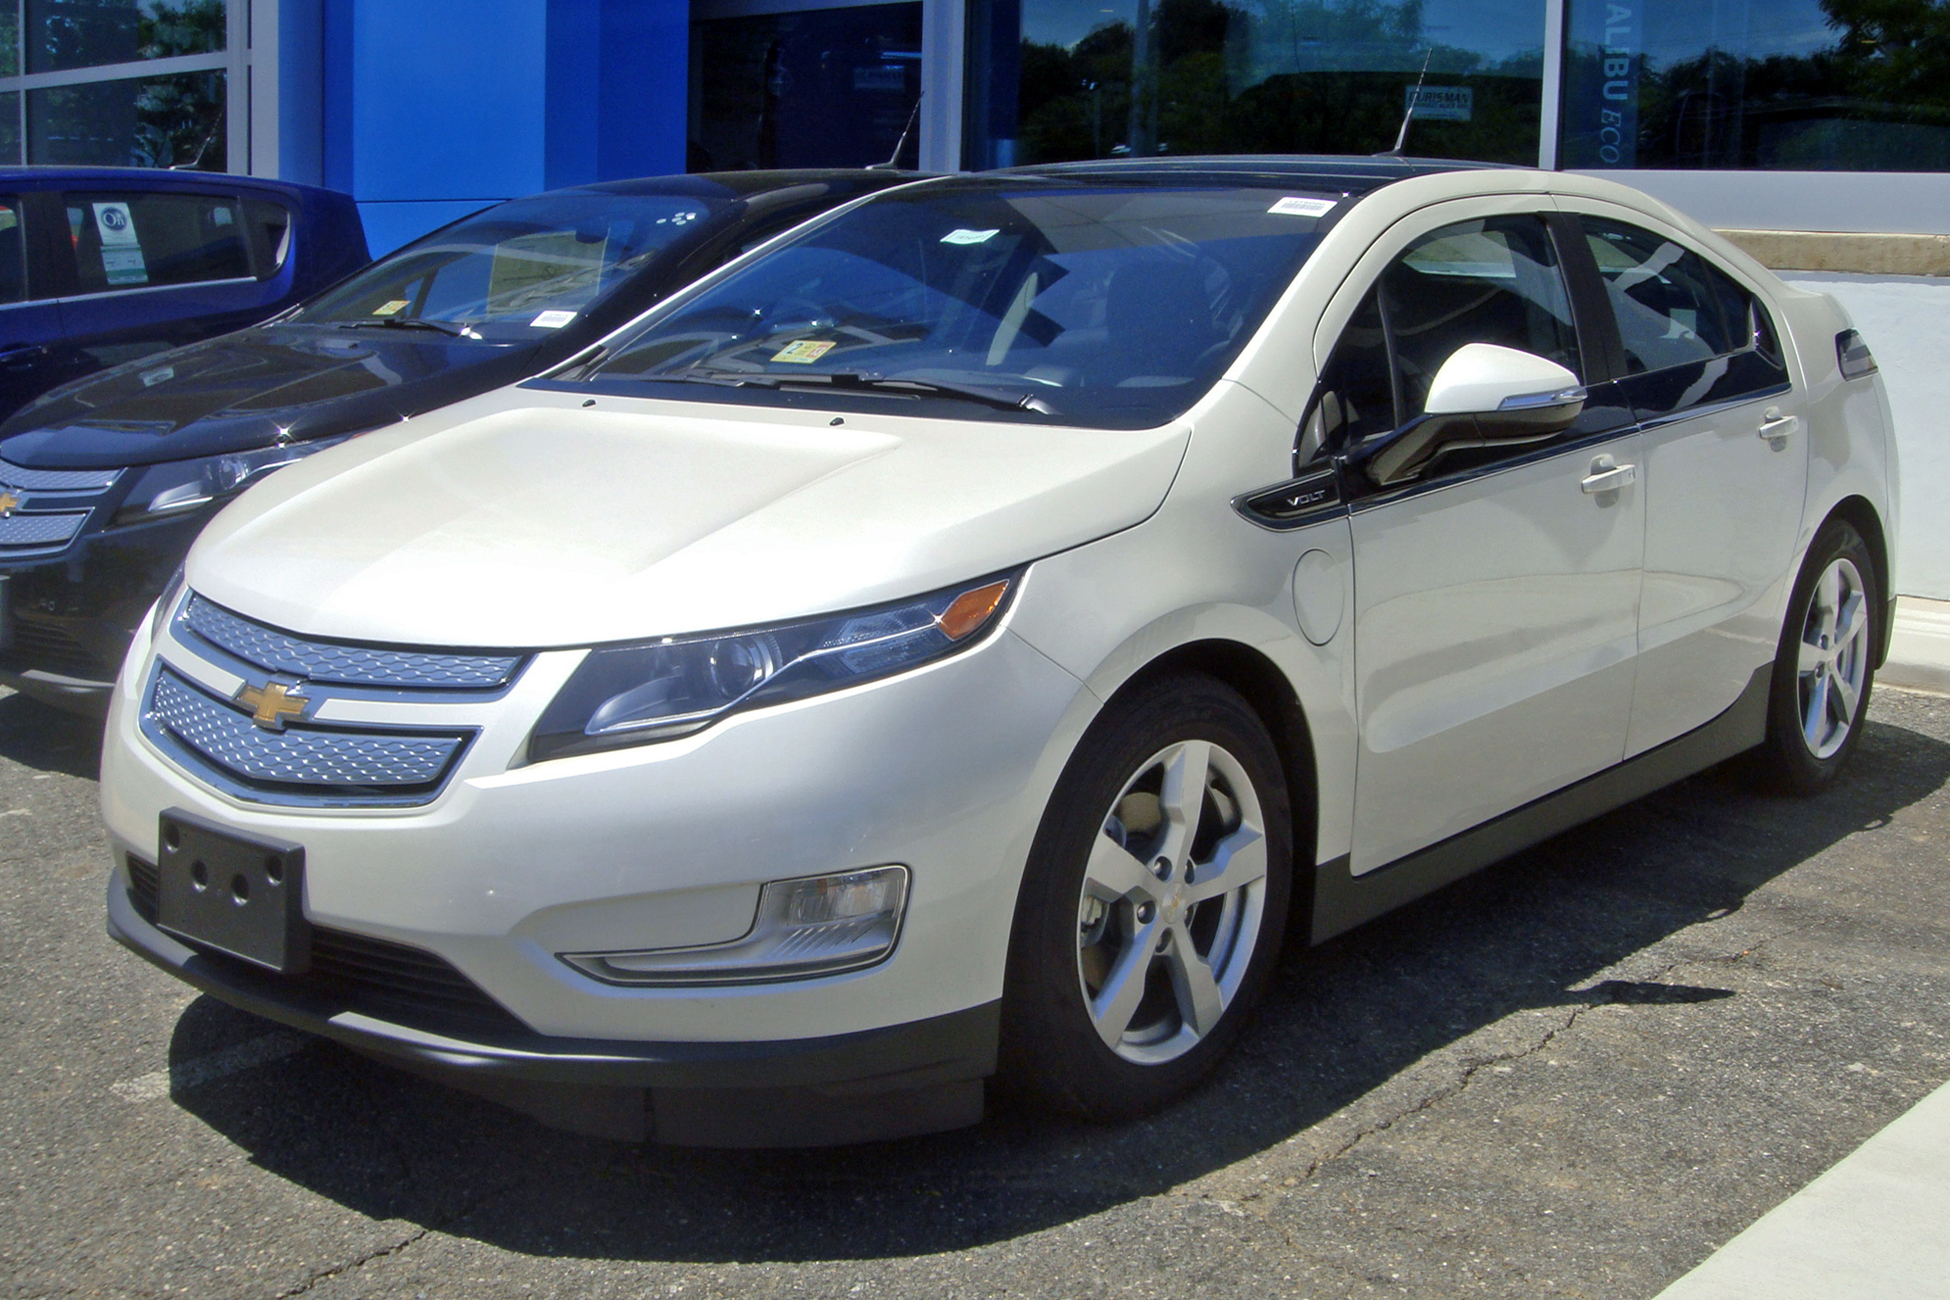 File:DCA 06 2012 Chevy Volt 4035.JPG - Wikimedia Commons